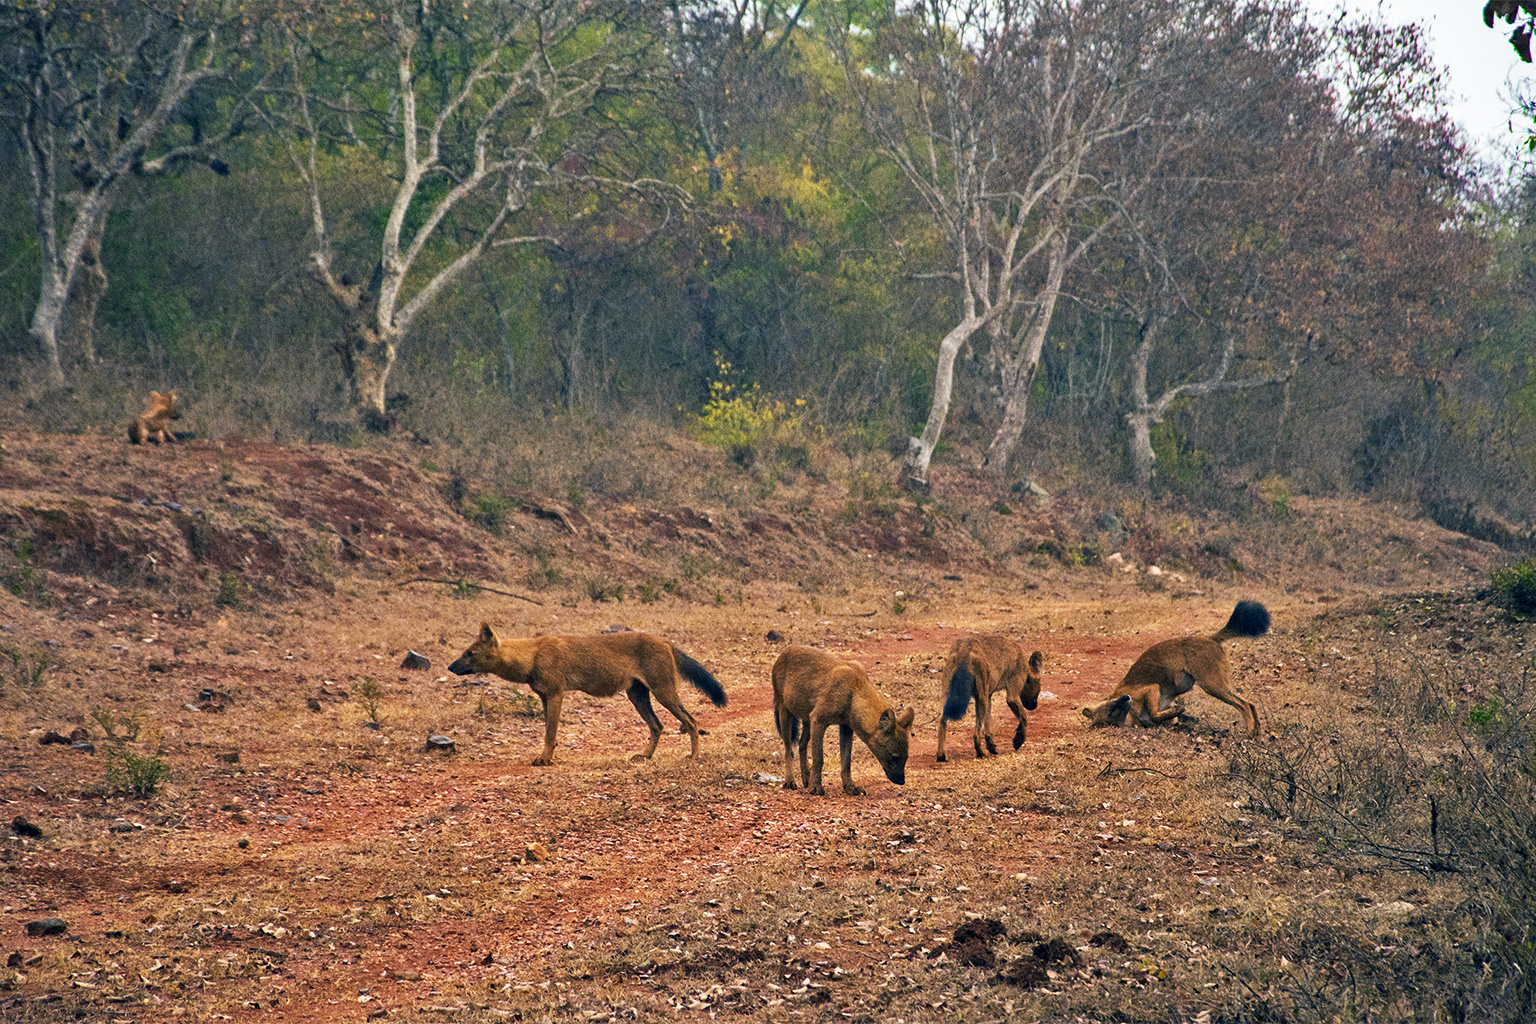 A dhole pack.